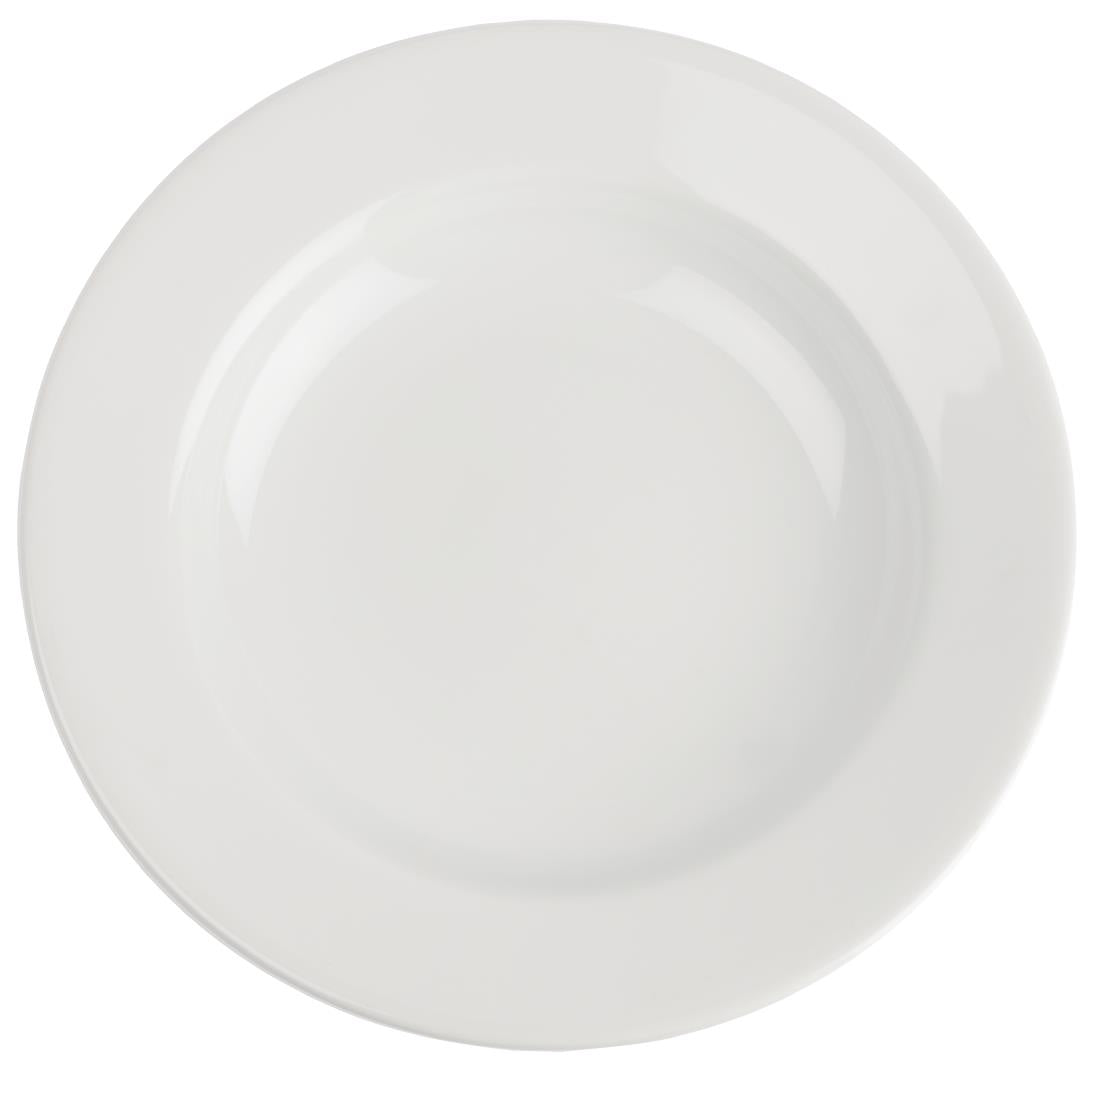 CG006 Royal Porcelain Classic White Wide Rim Plates 160mm (Pack of 12)